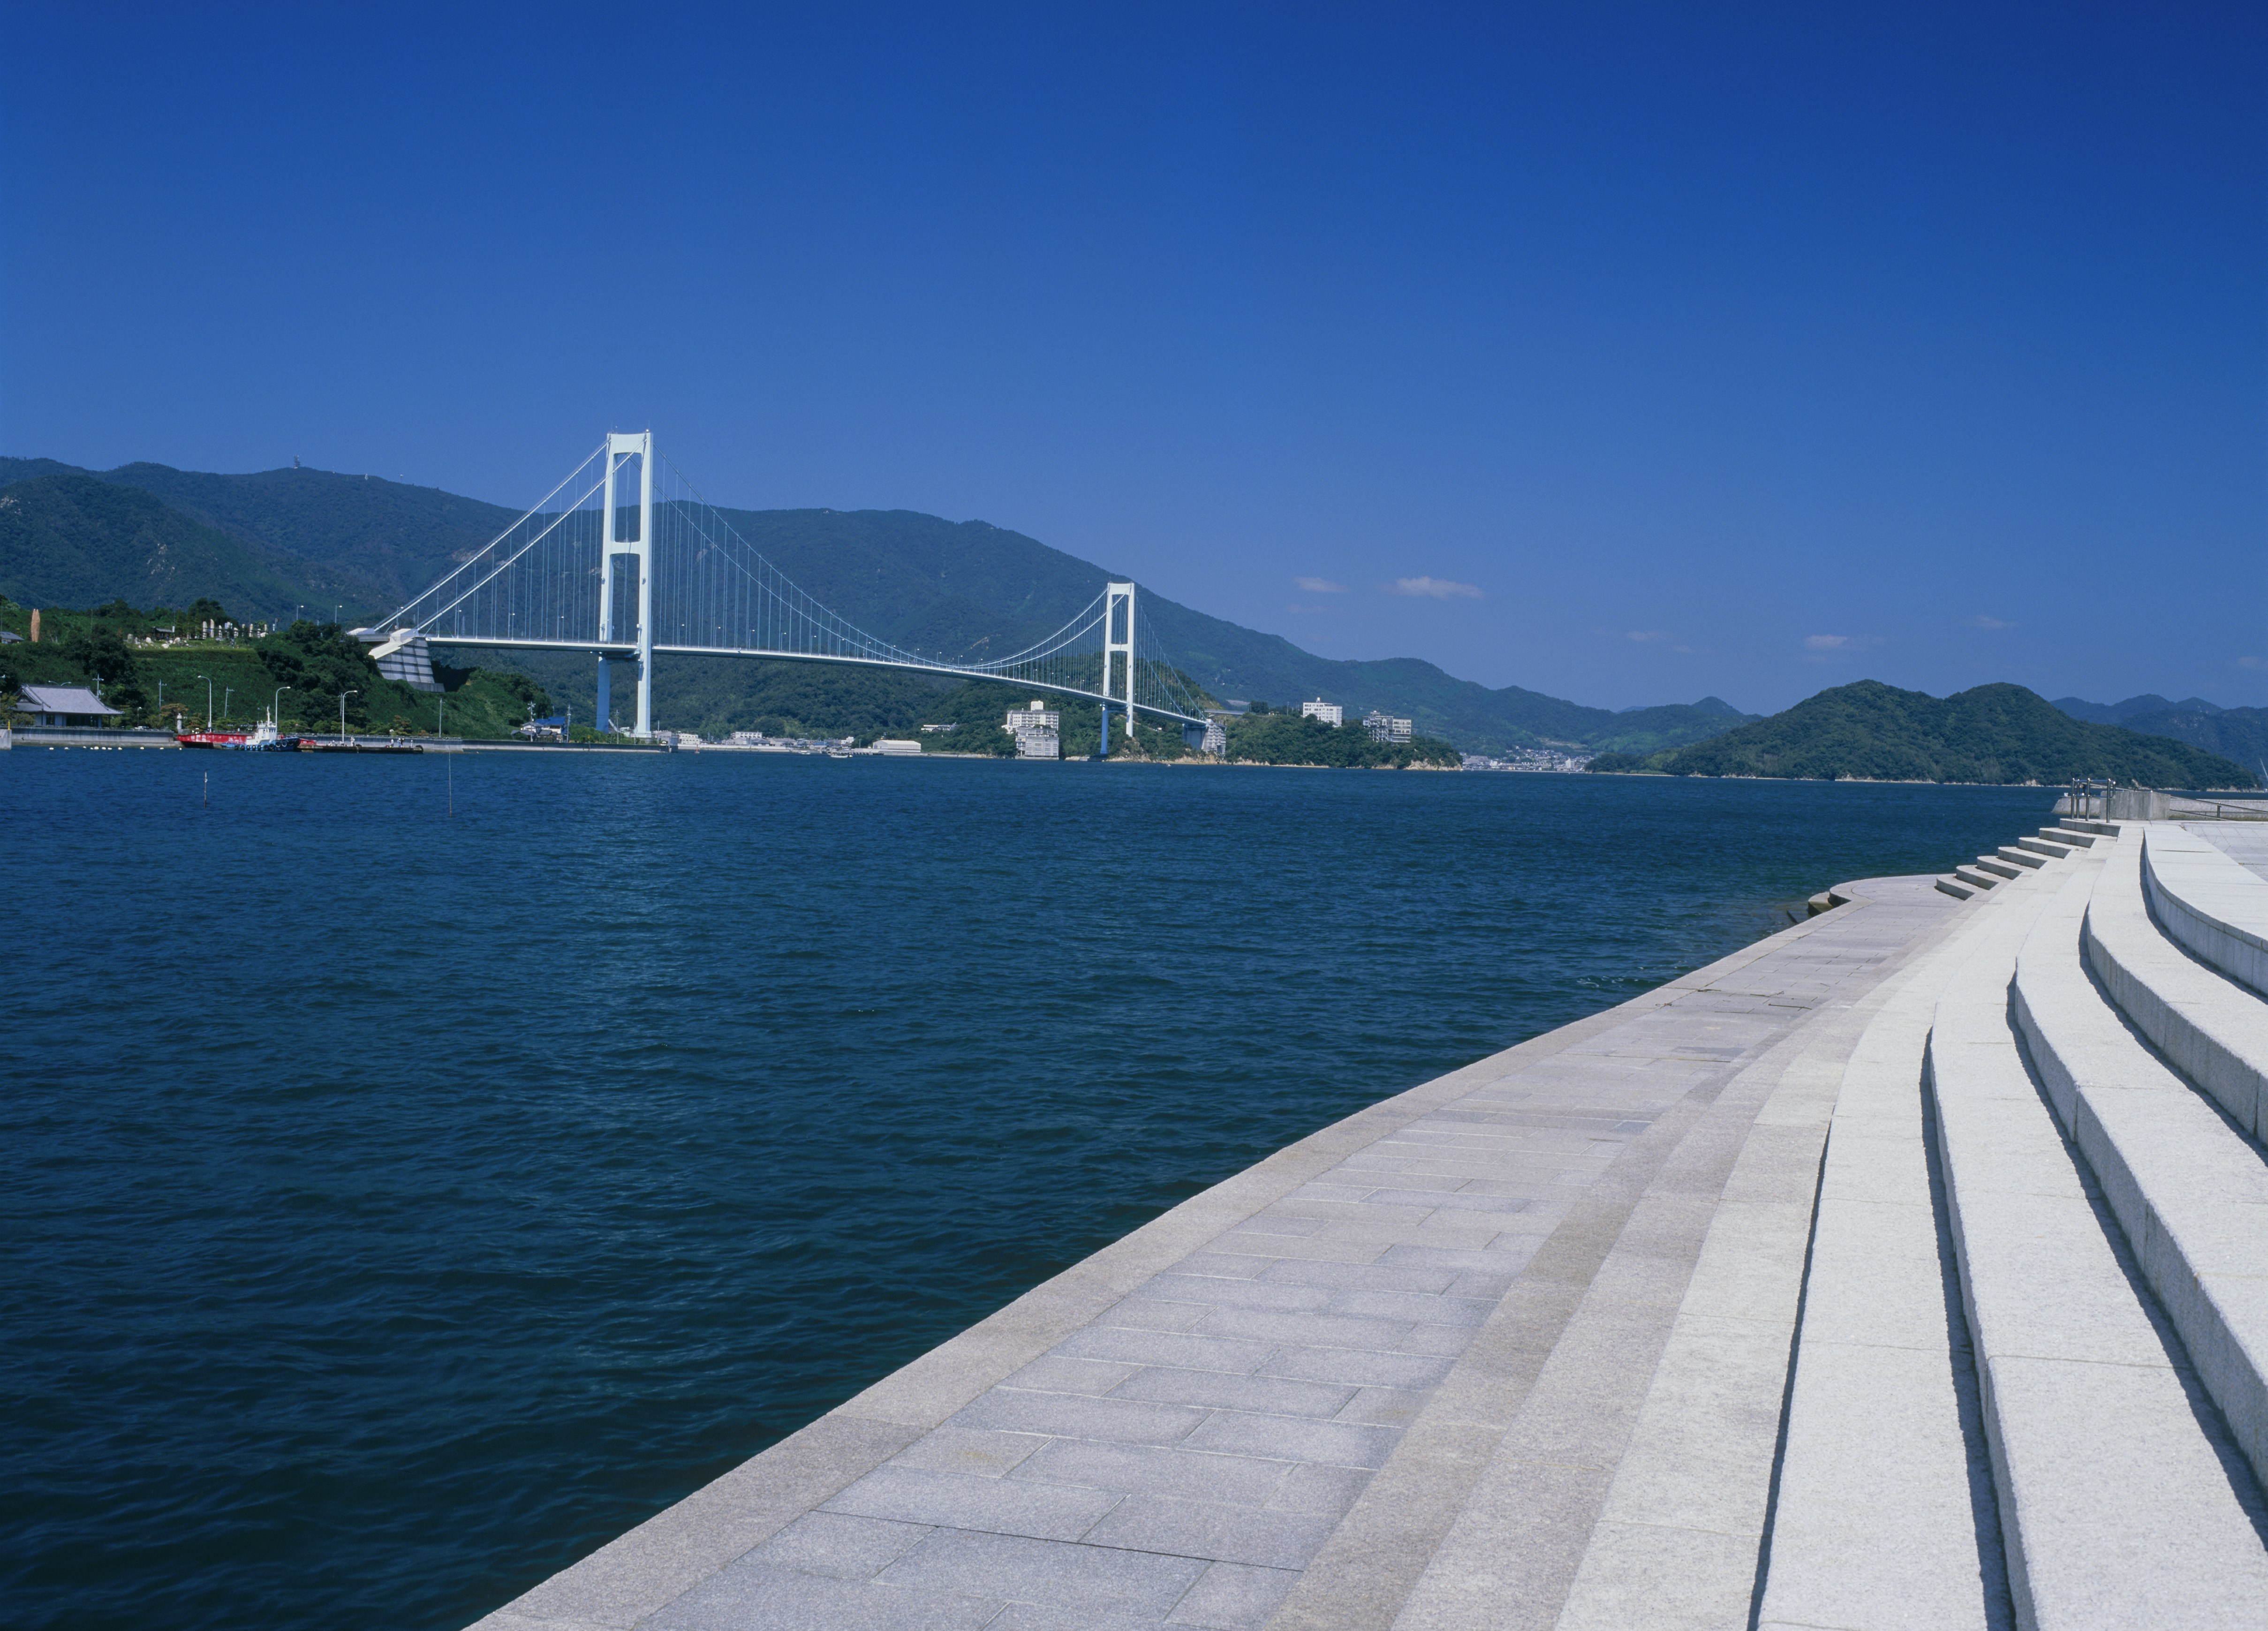 The Akinaada Bridge is a white suspension bridge with simple, modernist forms. It's shot from a series of concrete steps in Kure, Hiroshima that go right down to the deep, denim-blue water. In the distance at the foot of the bridge is a red ship, thin white streetlights, and some small grey buildings. On either end and behind it are tall green and blue mountains. The sky is a bright, deeply saturated blue.